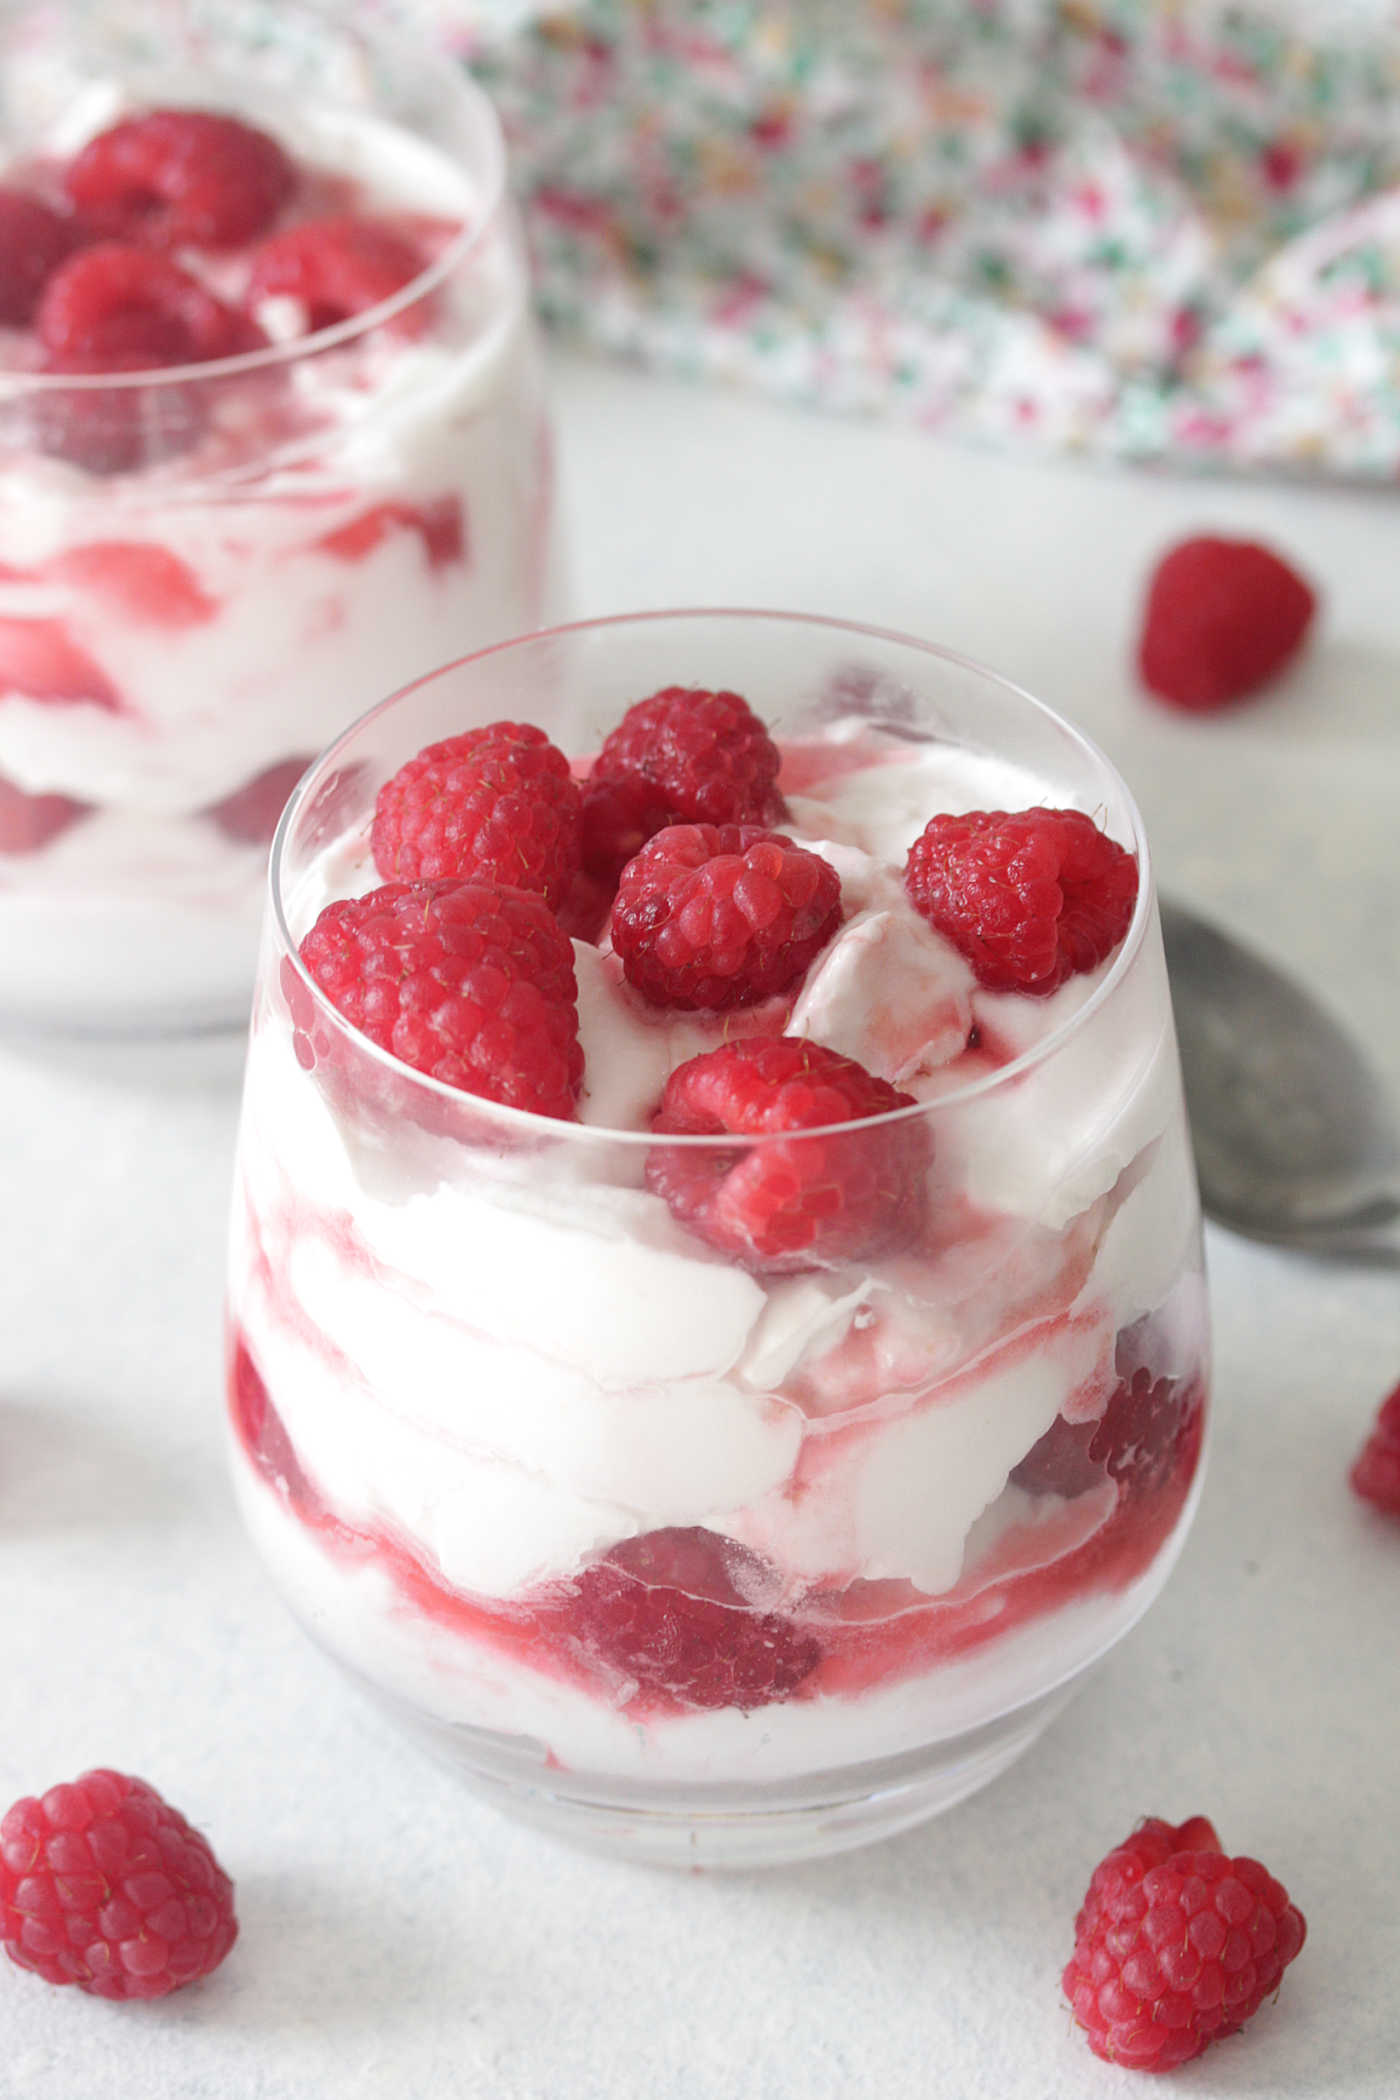 whipped cream and raspberries in a glass with raspberries on top